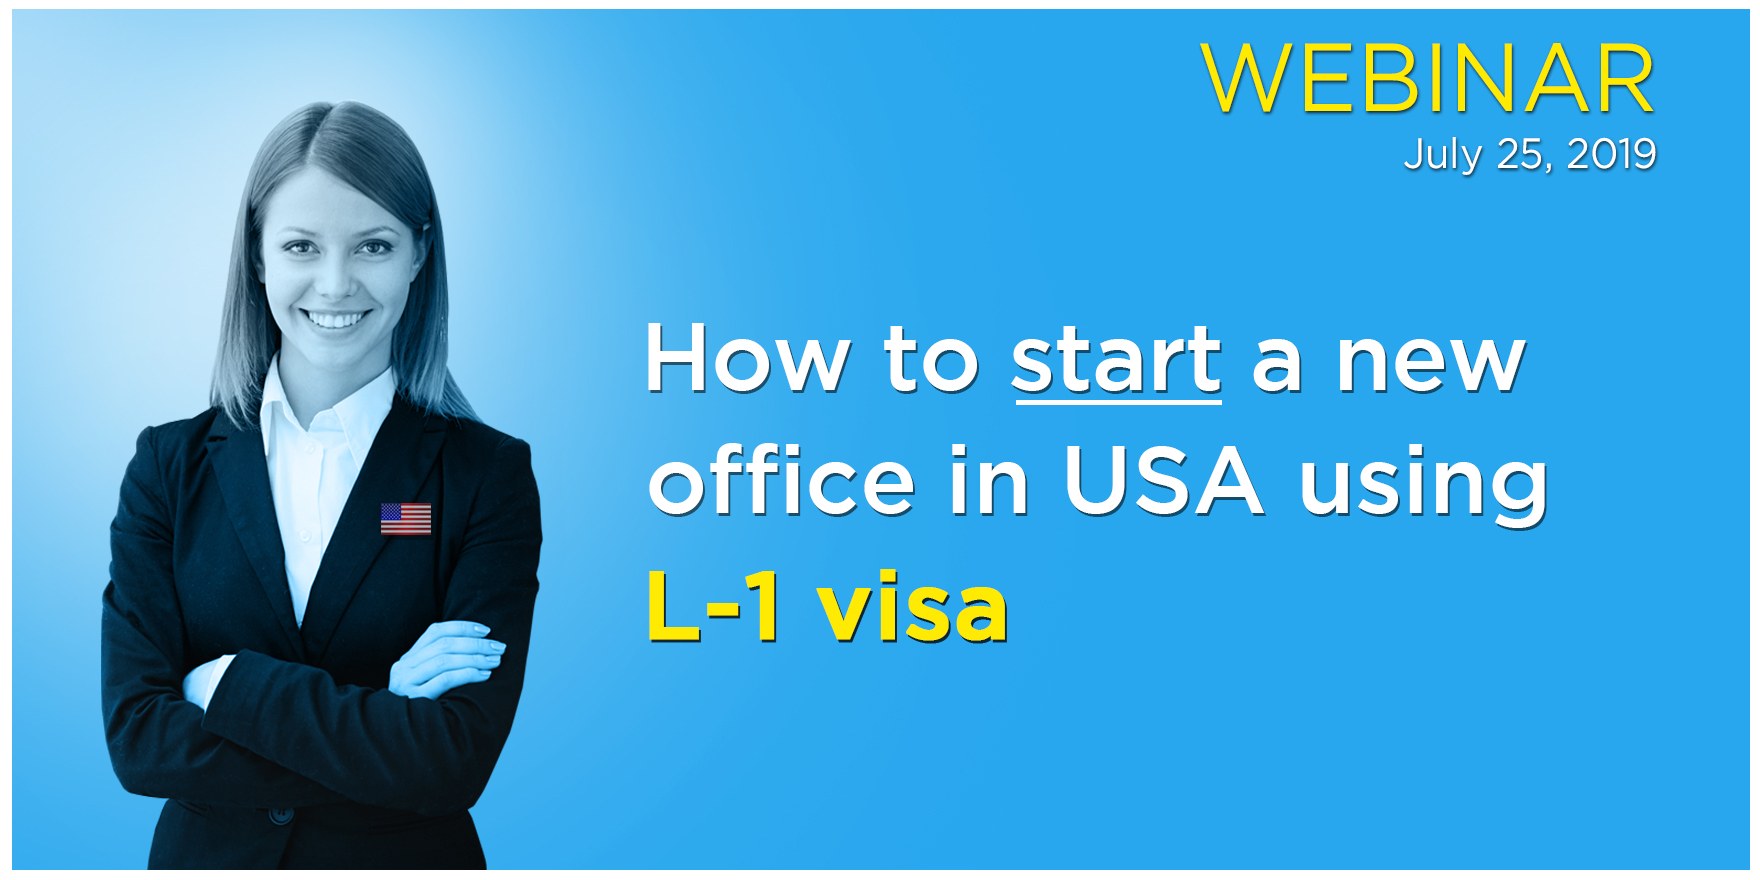 Immigration Seminar L1 Visa For Indian Citizens How To Get It Successfully, Shanghai, China